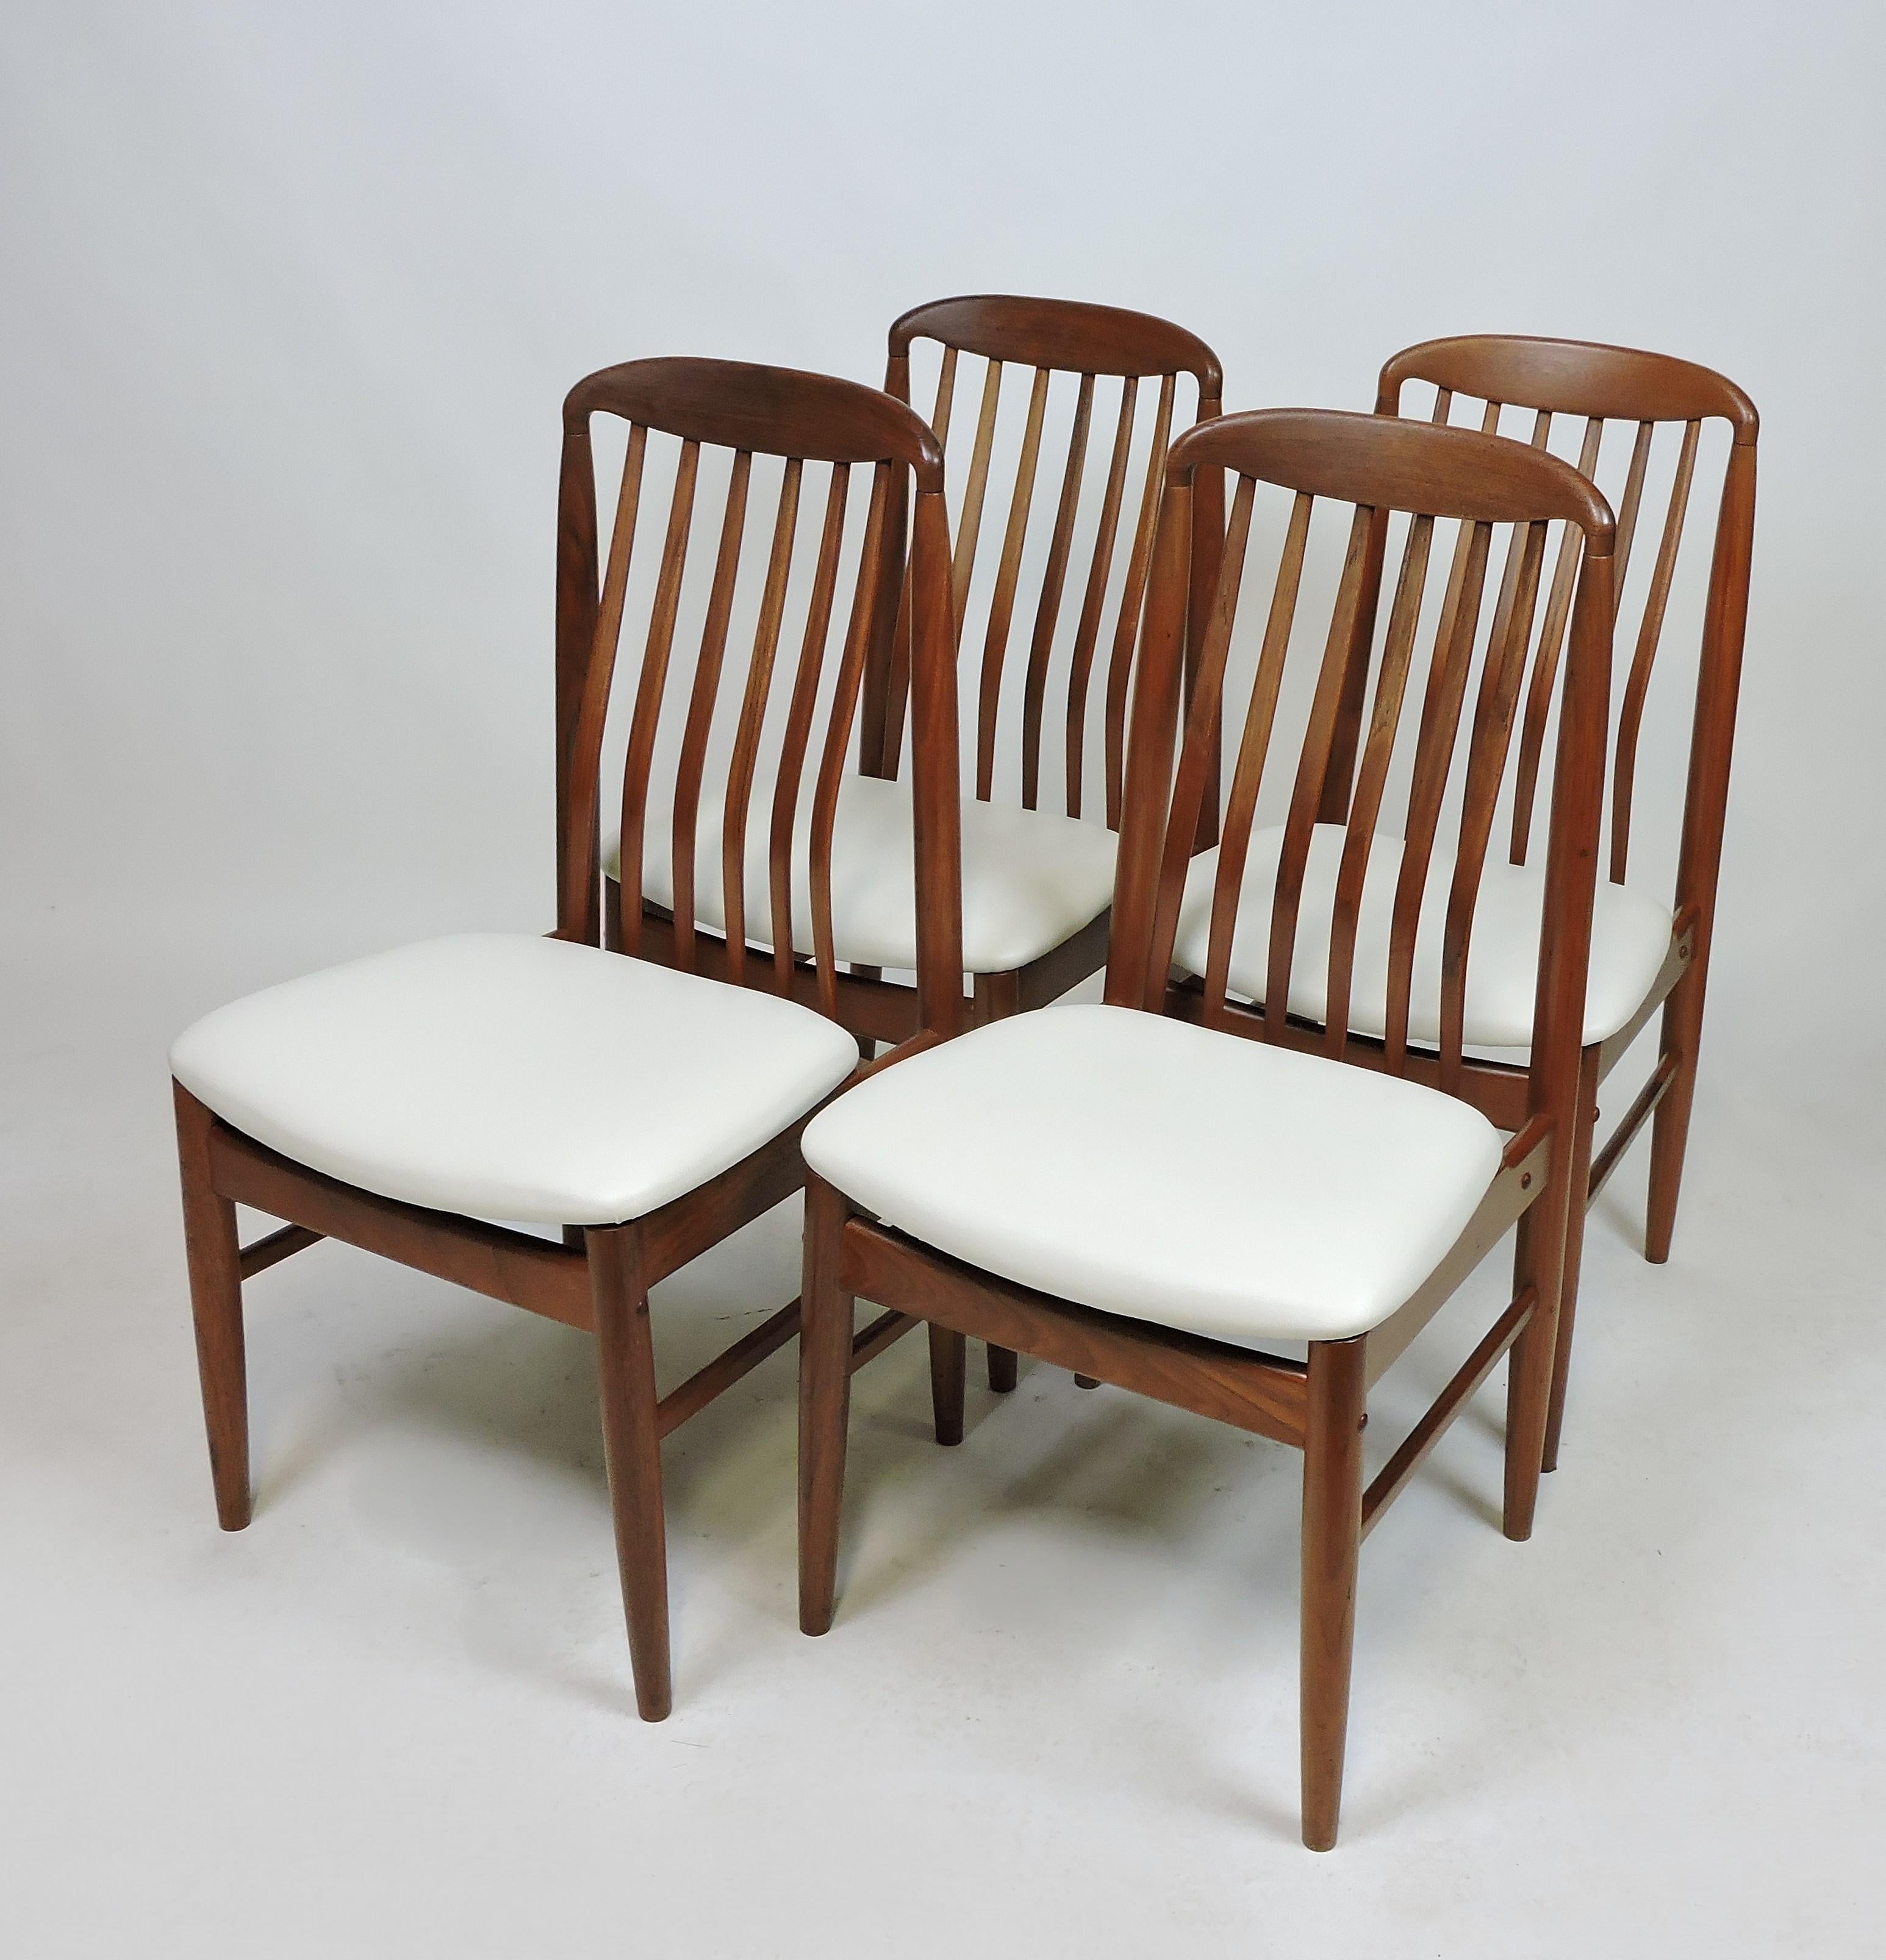 Set of four BL10 Sanne dining chairs designed by Danish designer Benny Linden. These chairs are made of solid teak with contoured spindle backs and seats newly upholstered in a white Naugahyde. Very comfortable chairs with a graceful look.